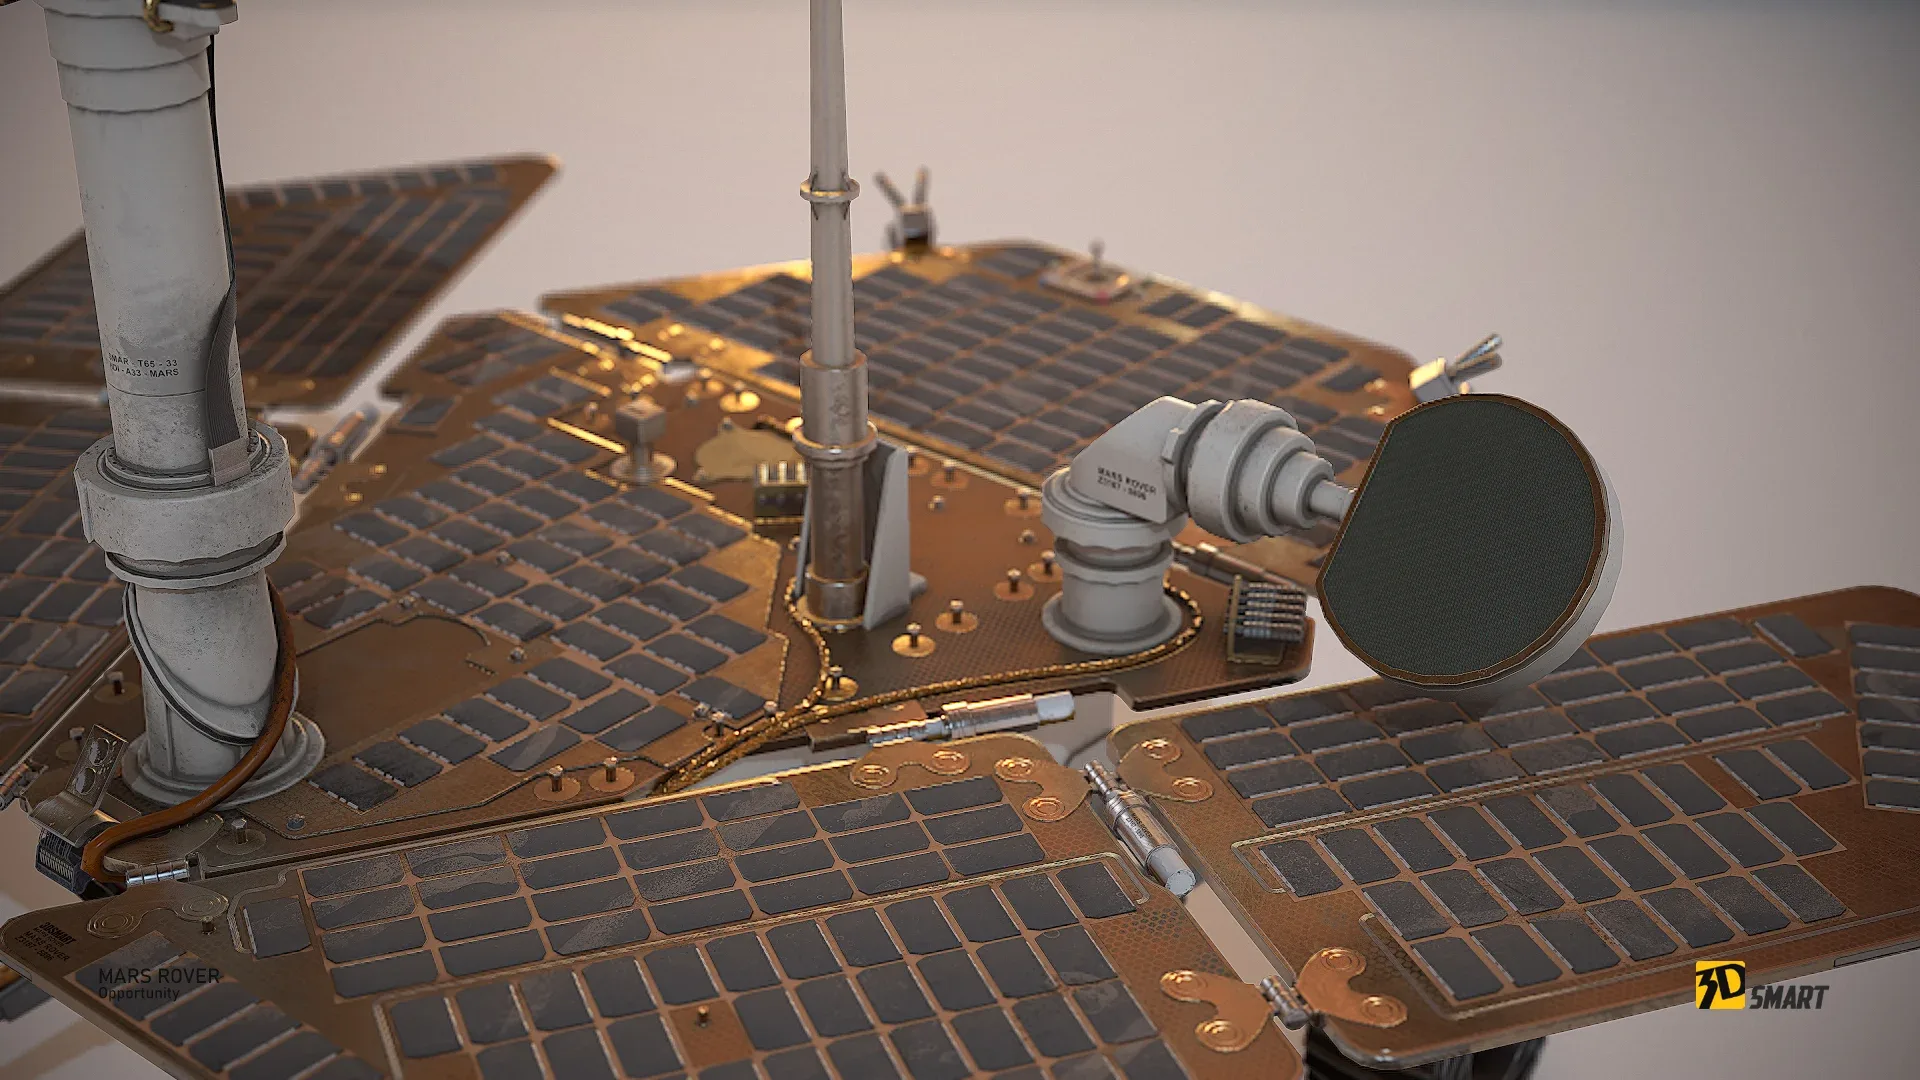 Opportunity Mars Rover (LowPoly)